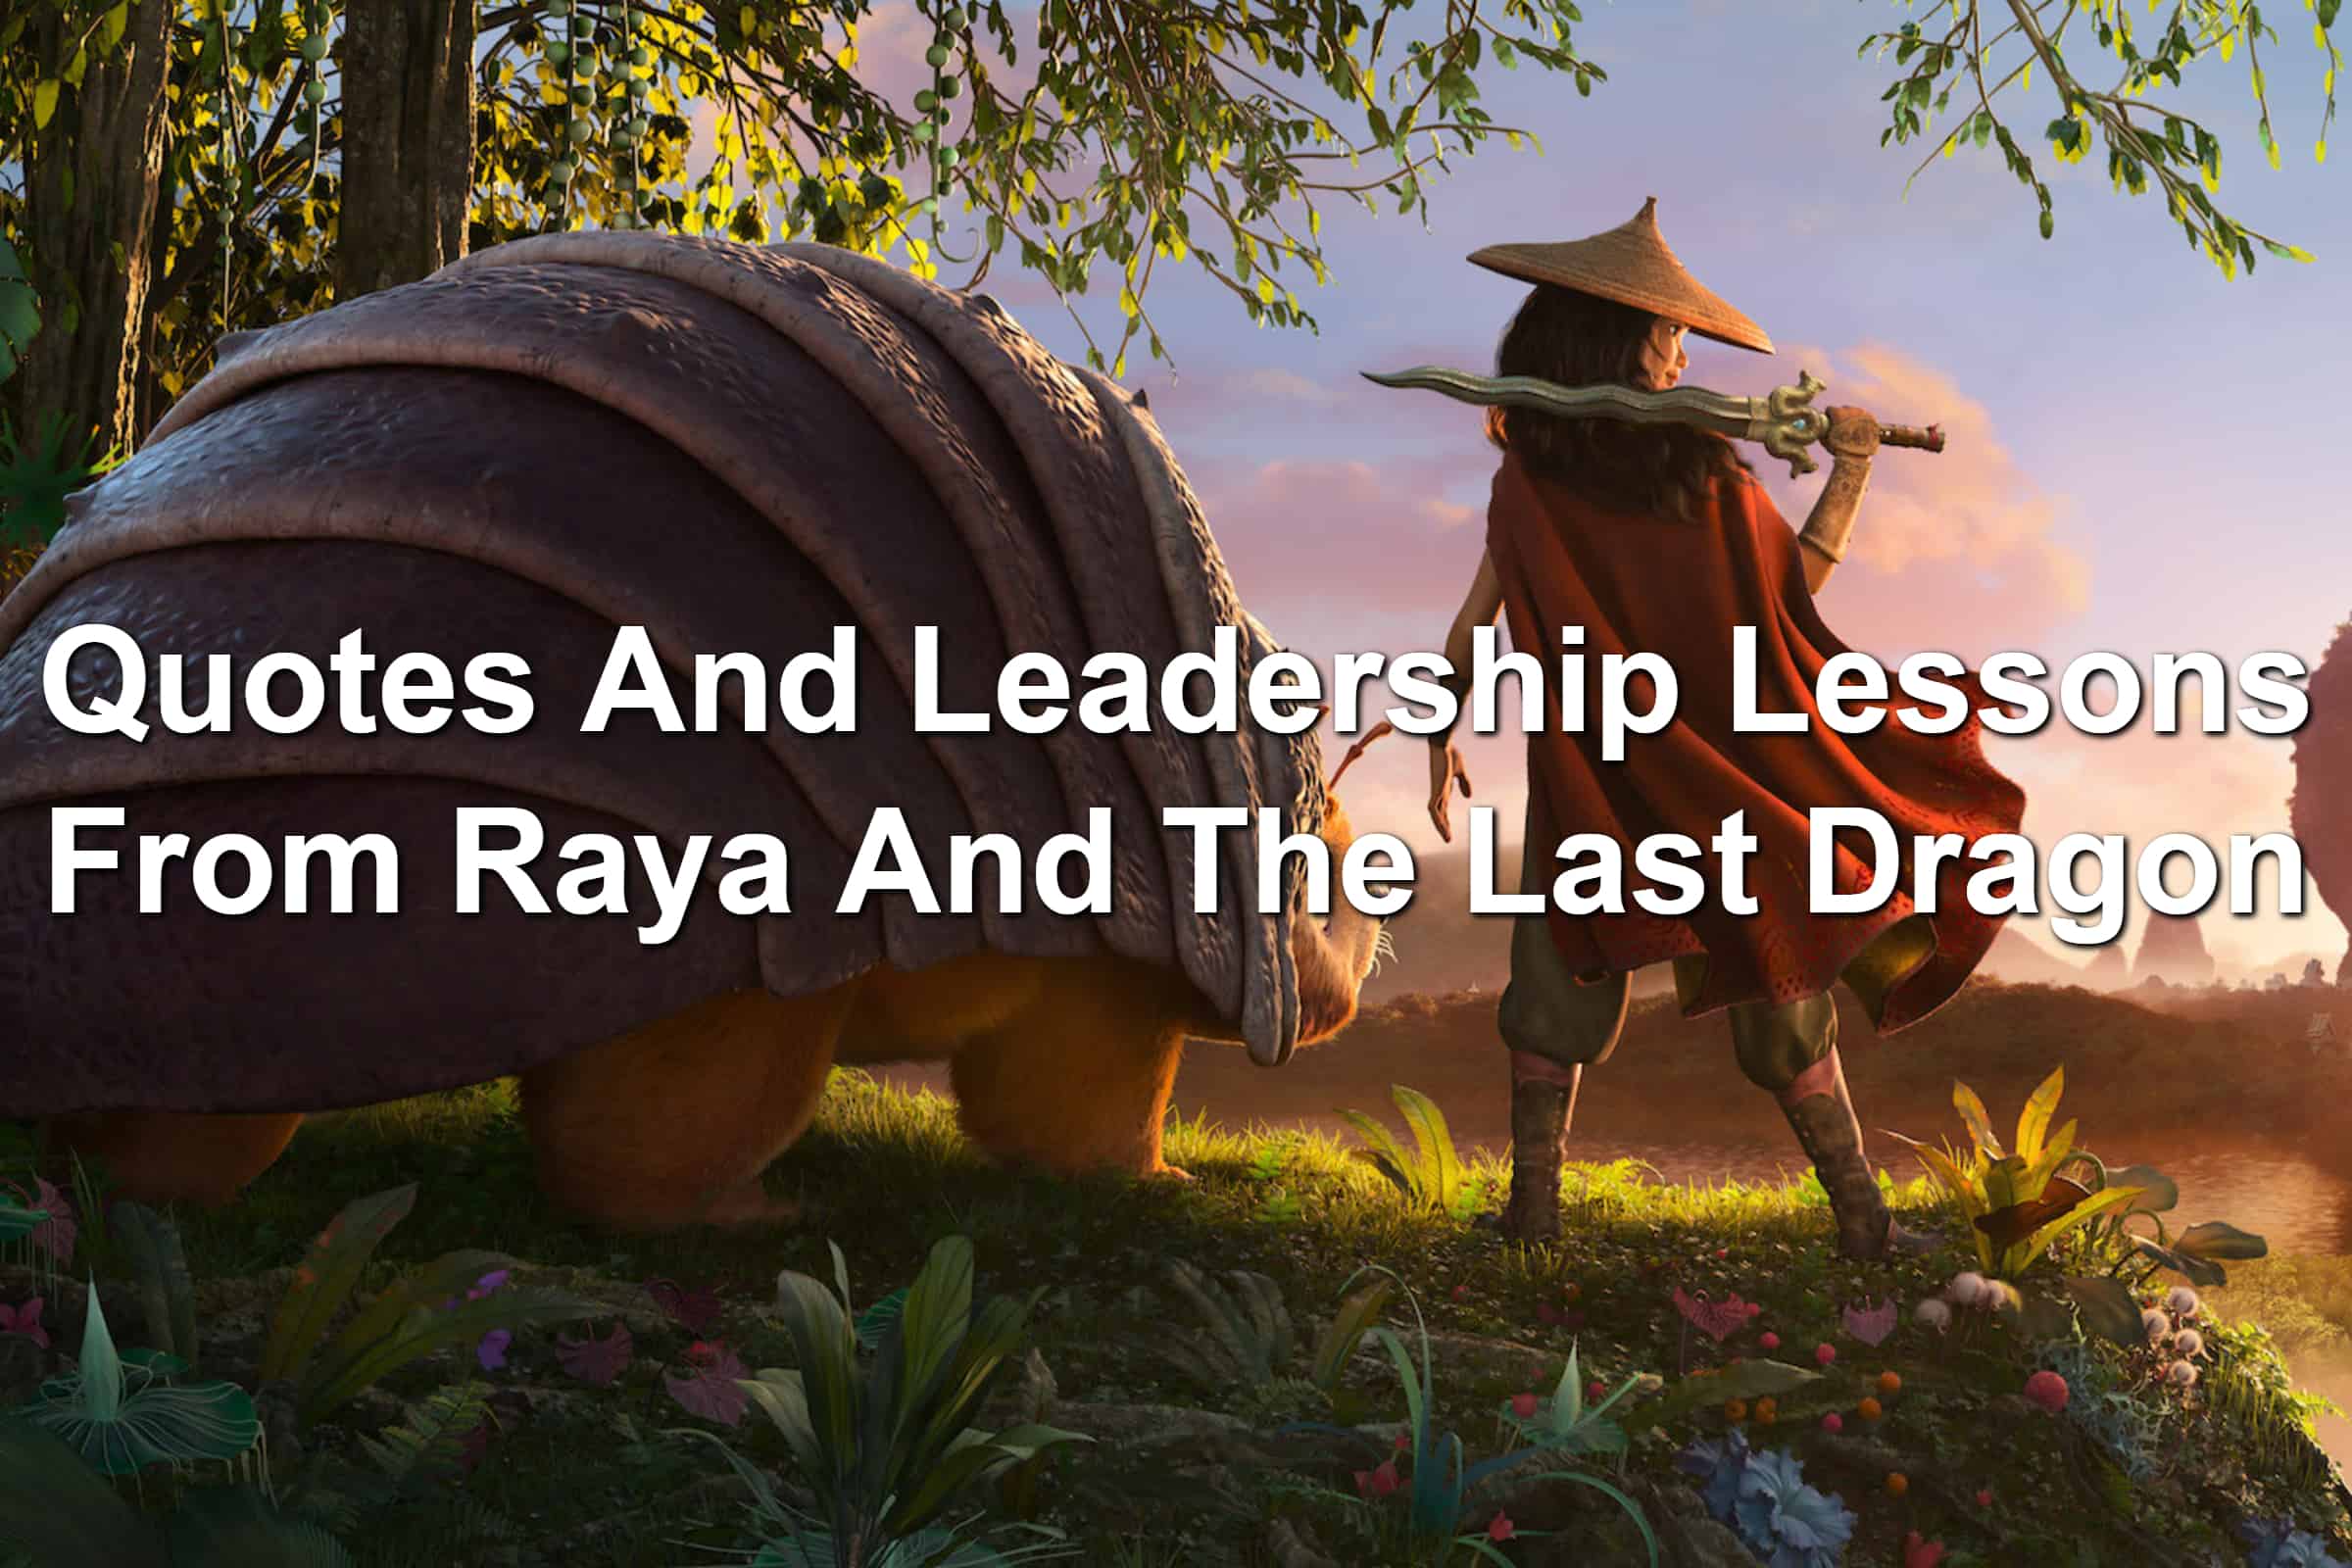 Animated characters Raya and Tuk Tuk in a promotional image for Raya And The Last Dragon